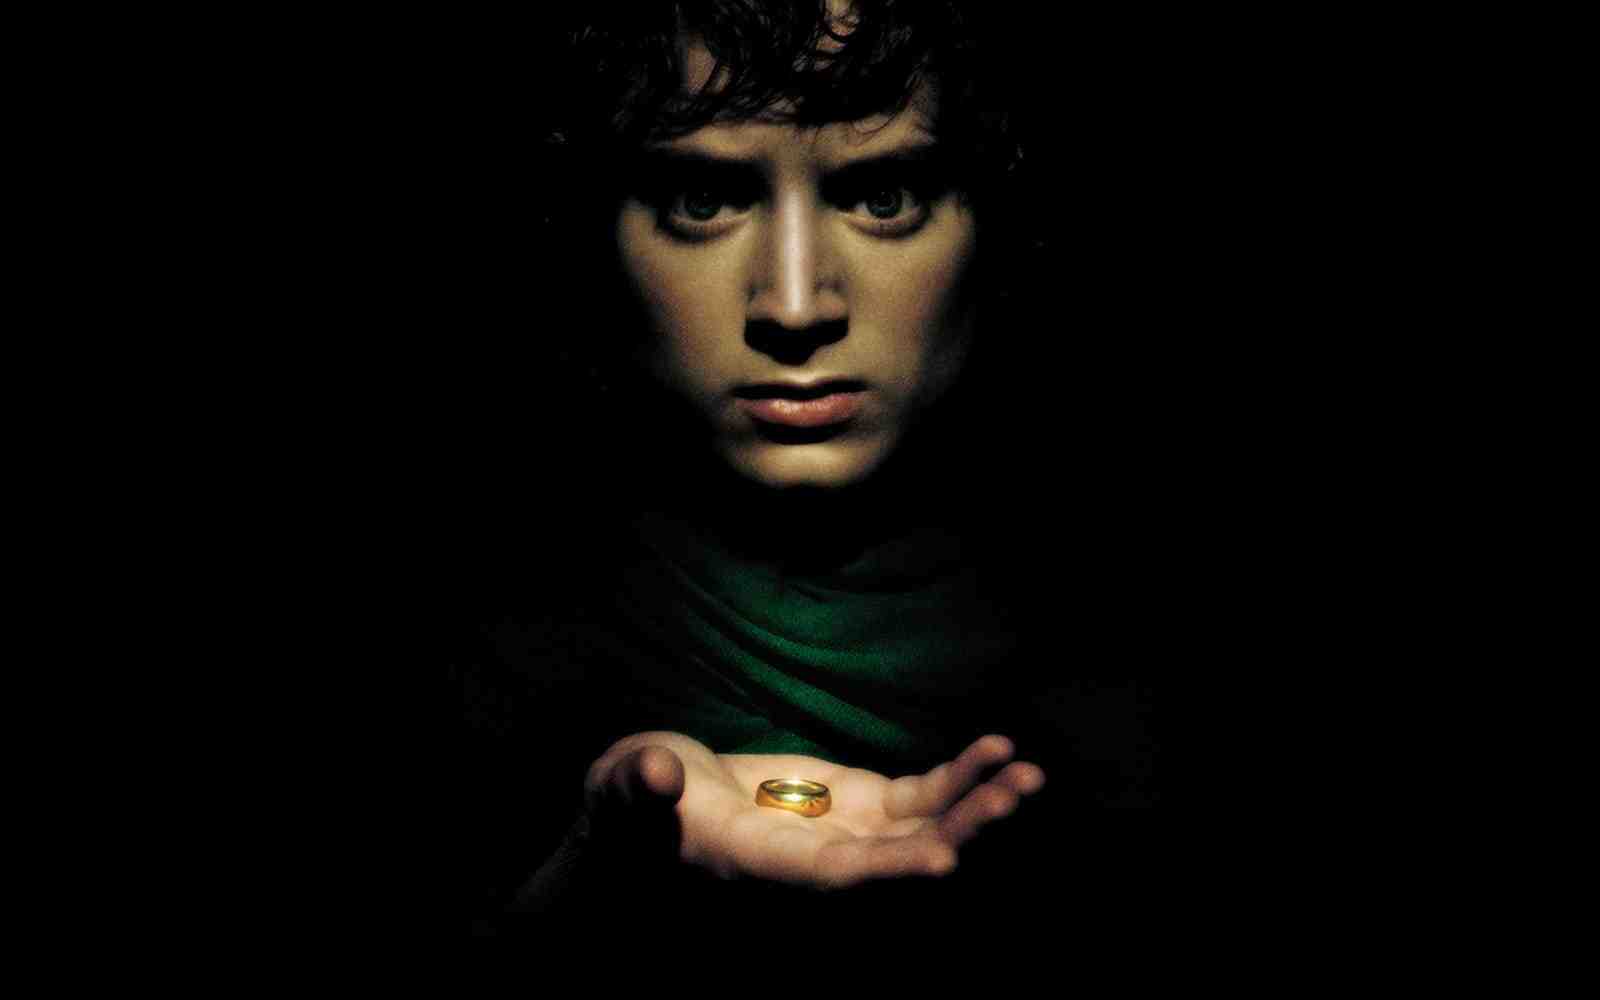 Lord of the Rings: The Fellowship of the Ring - Peter Jackson